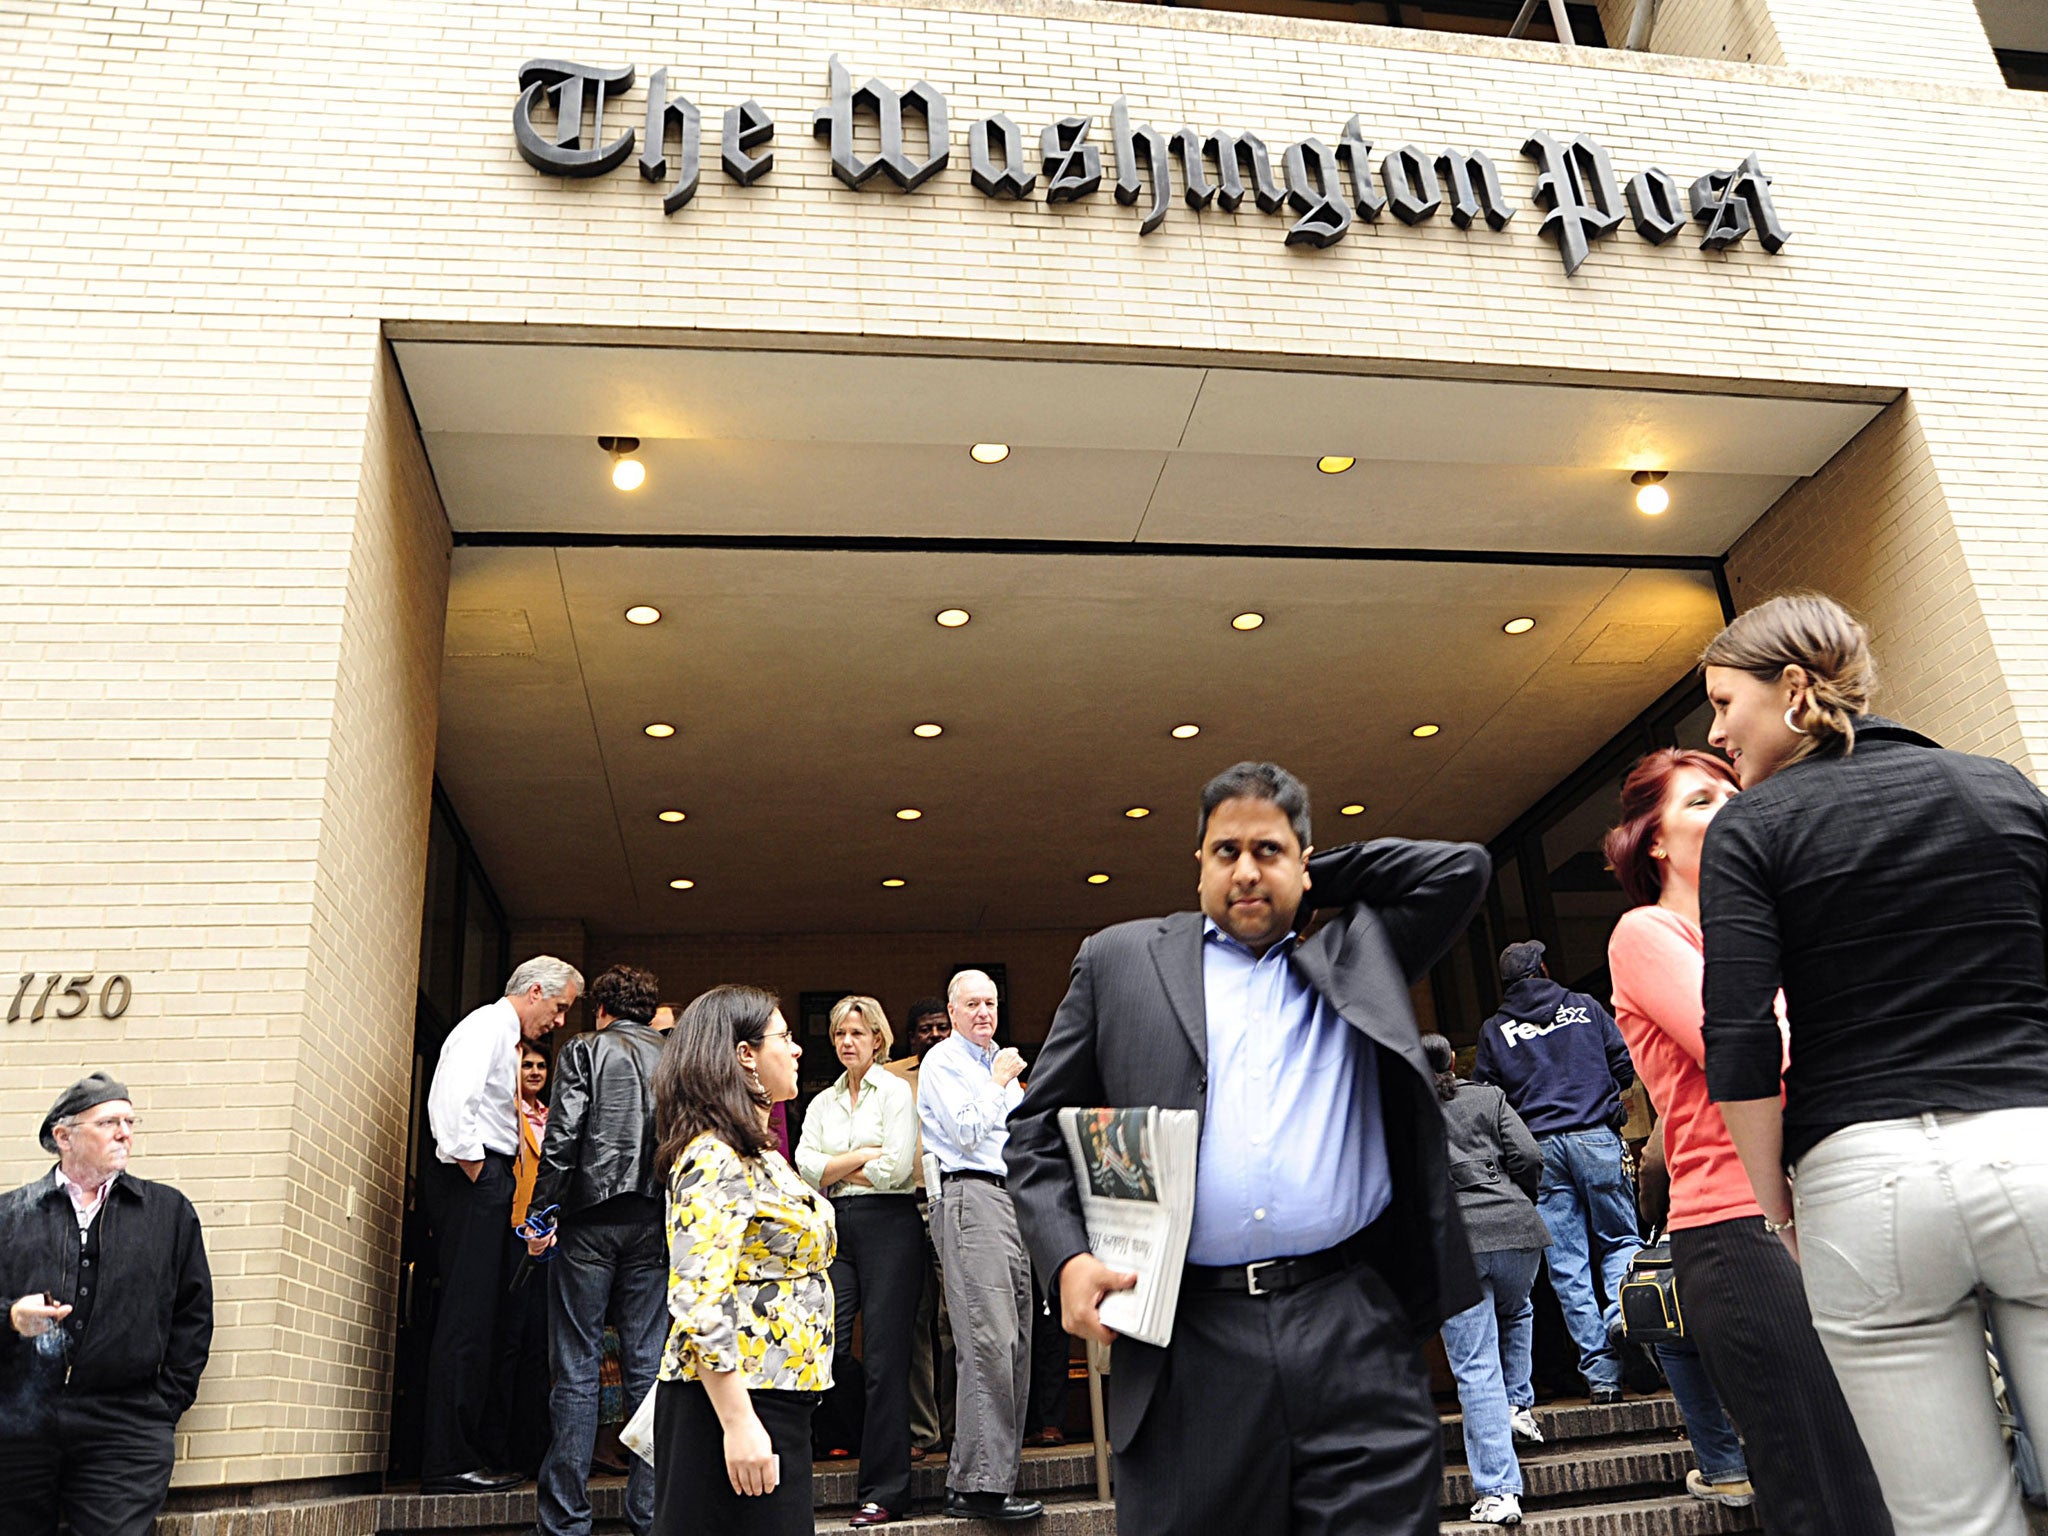 The Washington Post has been sold to Jeffrey Bezos for 0m